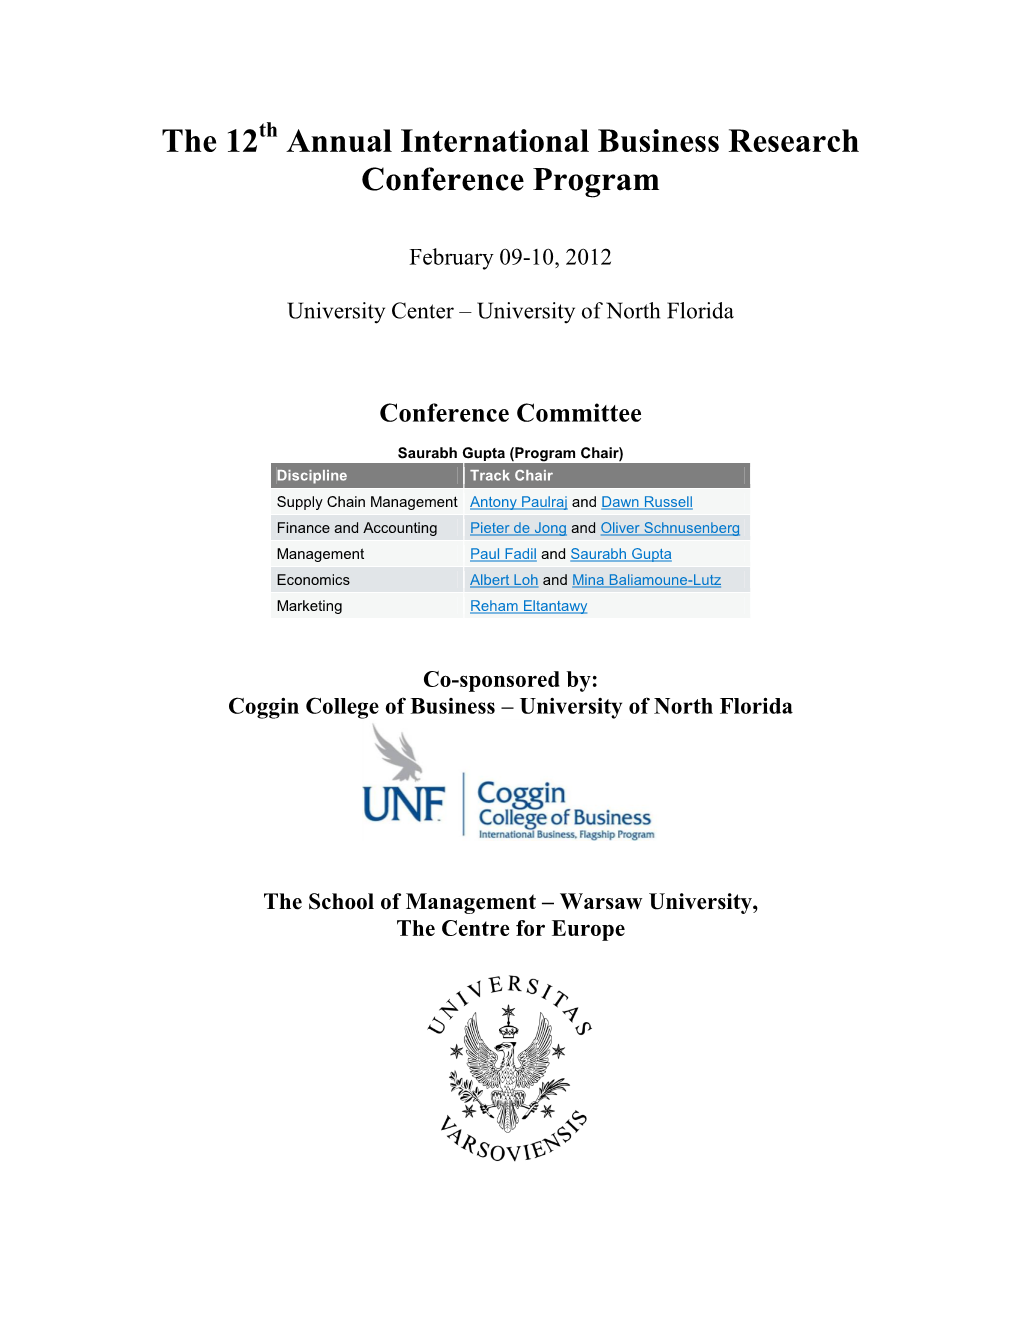 The Ninth Annual International Business Research Conference